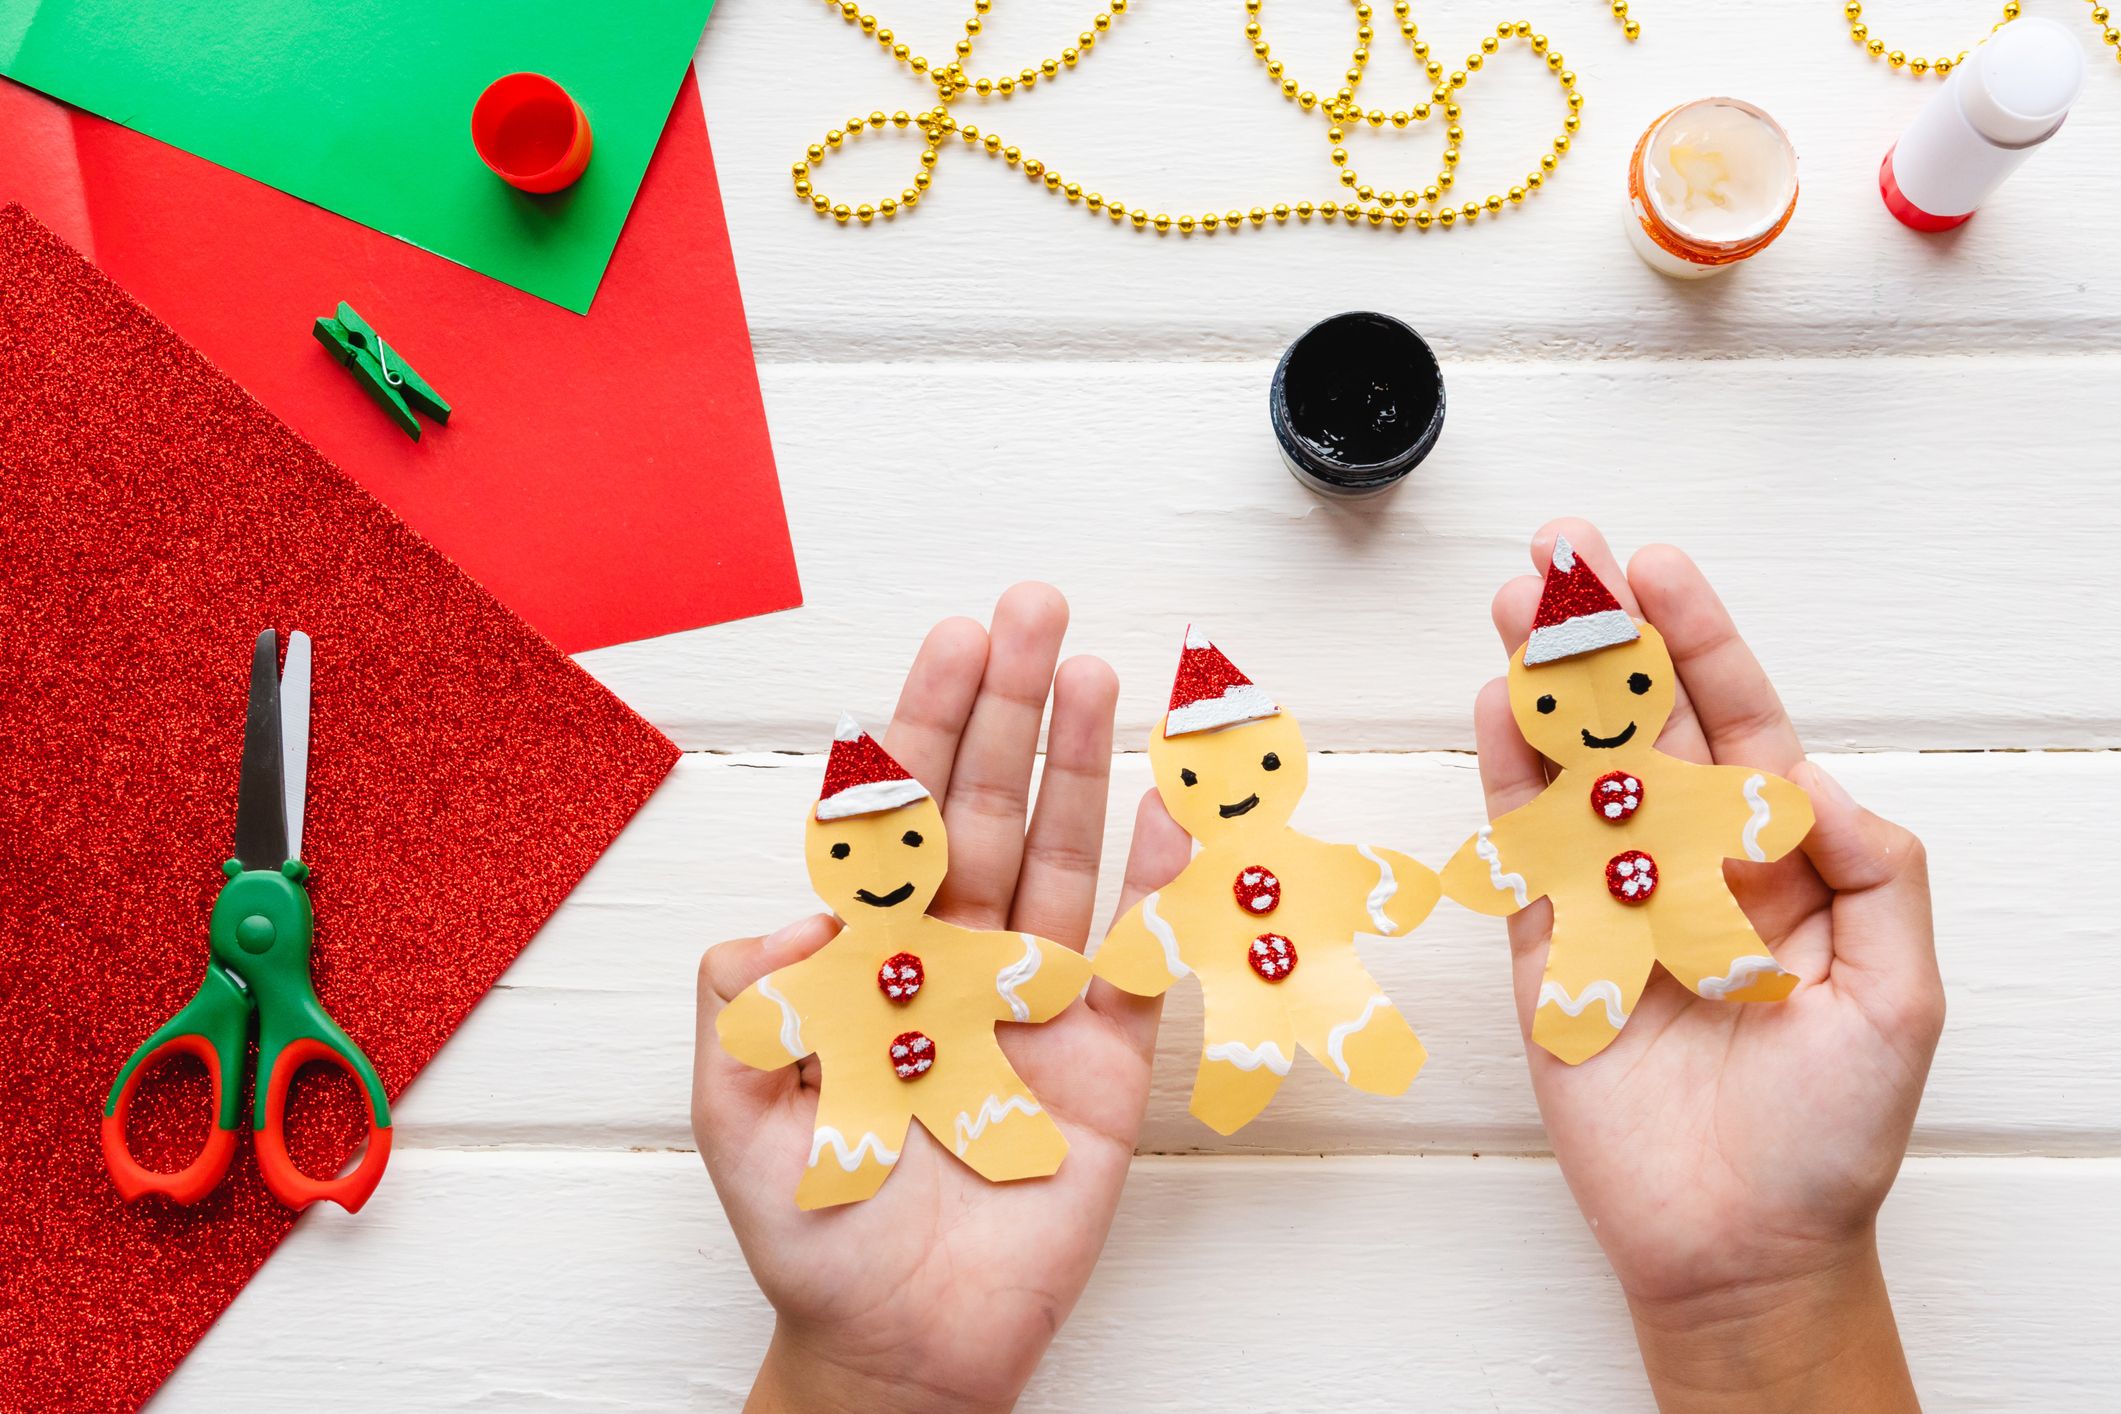 Fun Christmas craft ideas for kids to try